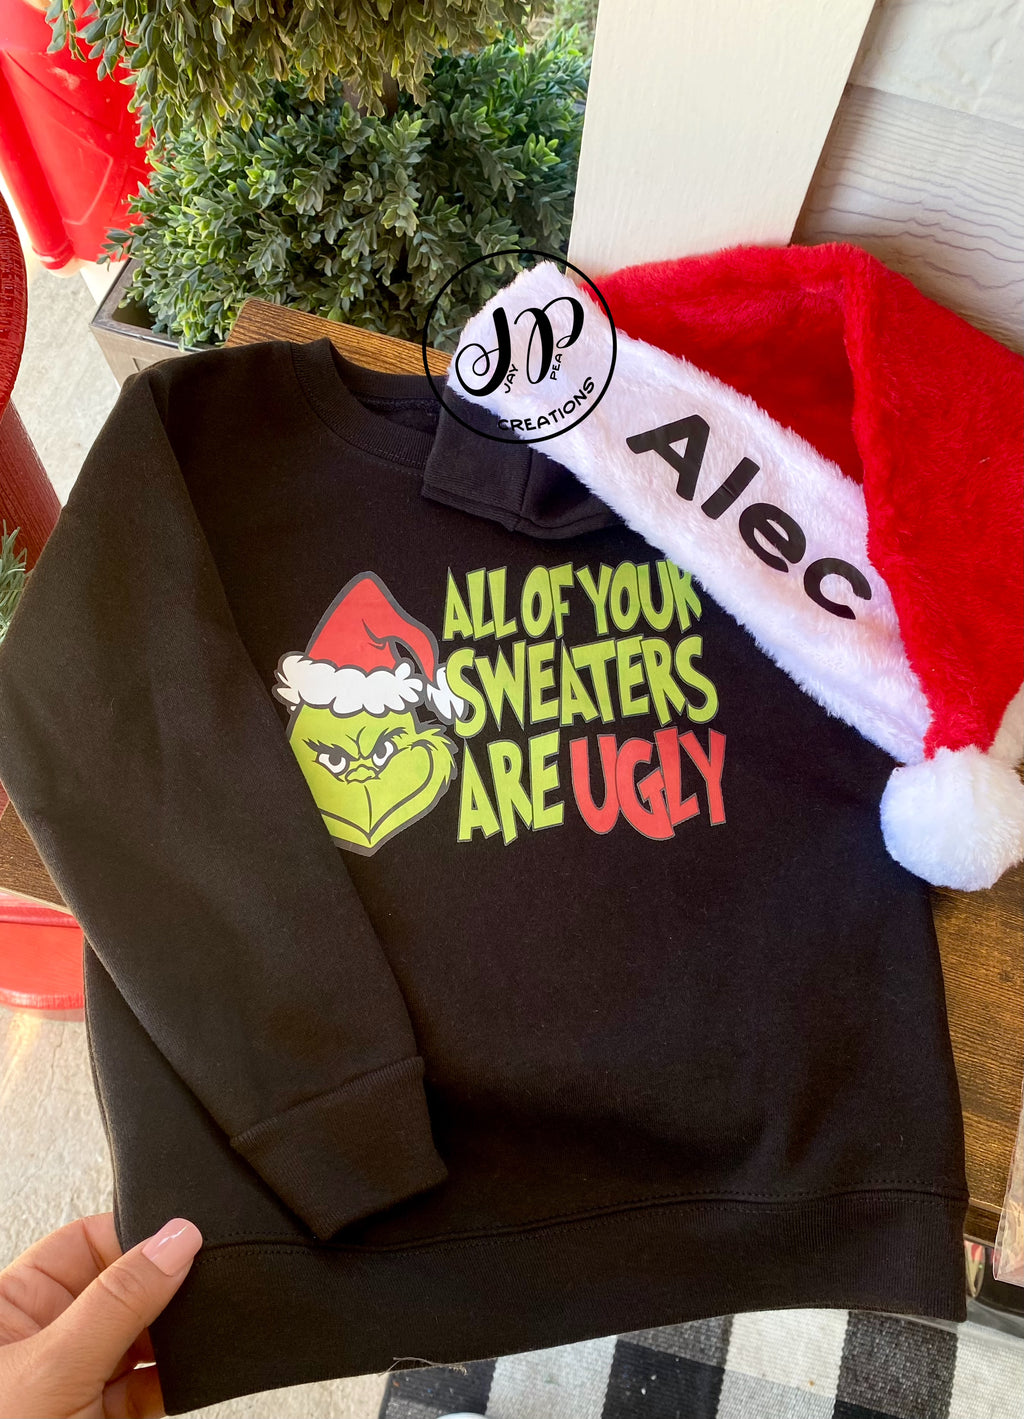 All your sweaters are ugly